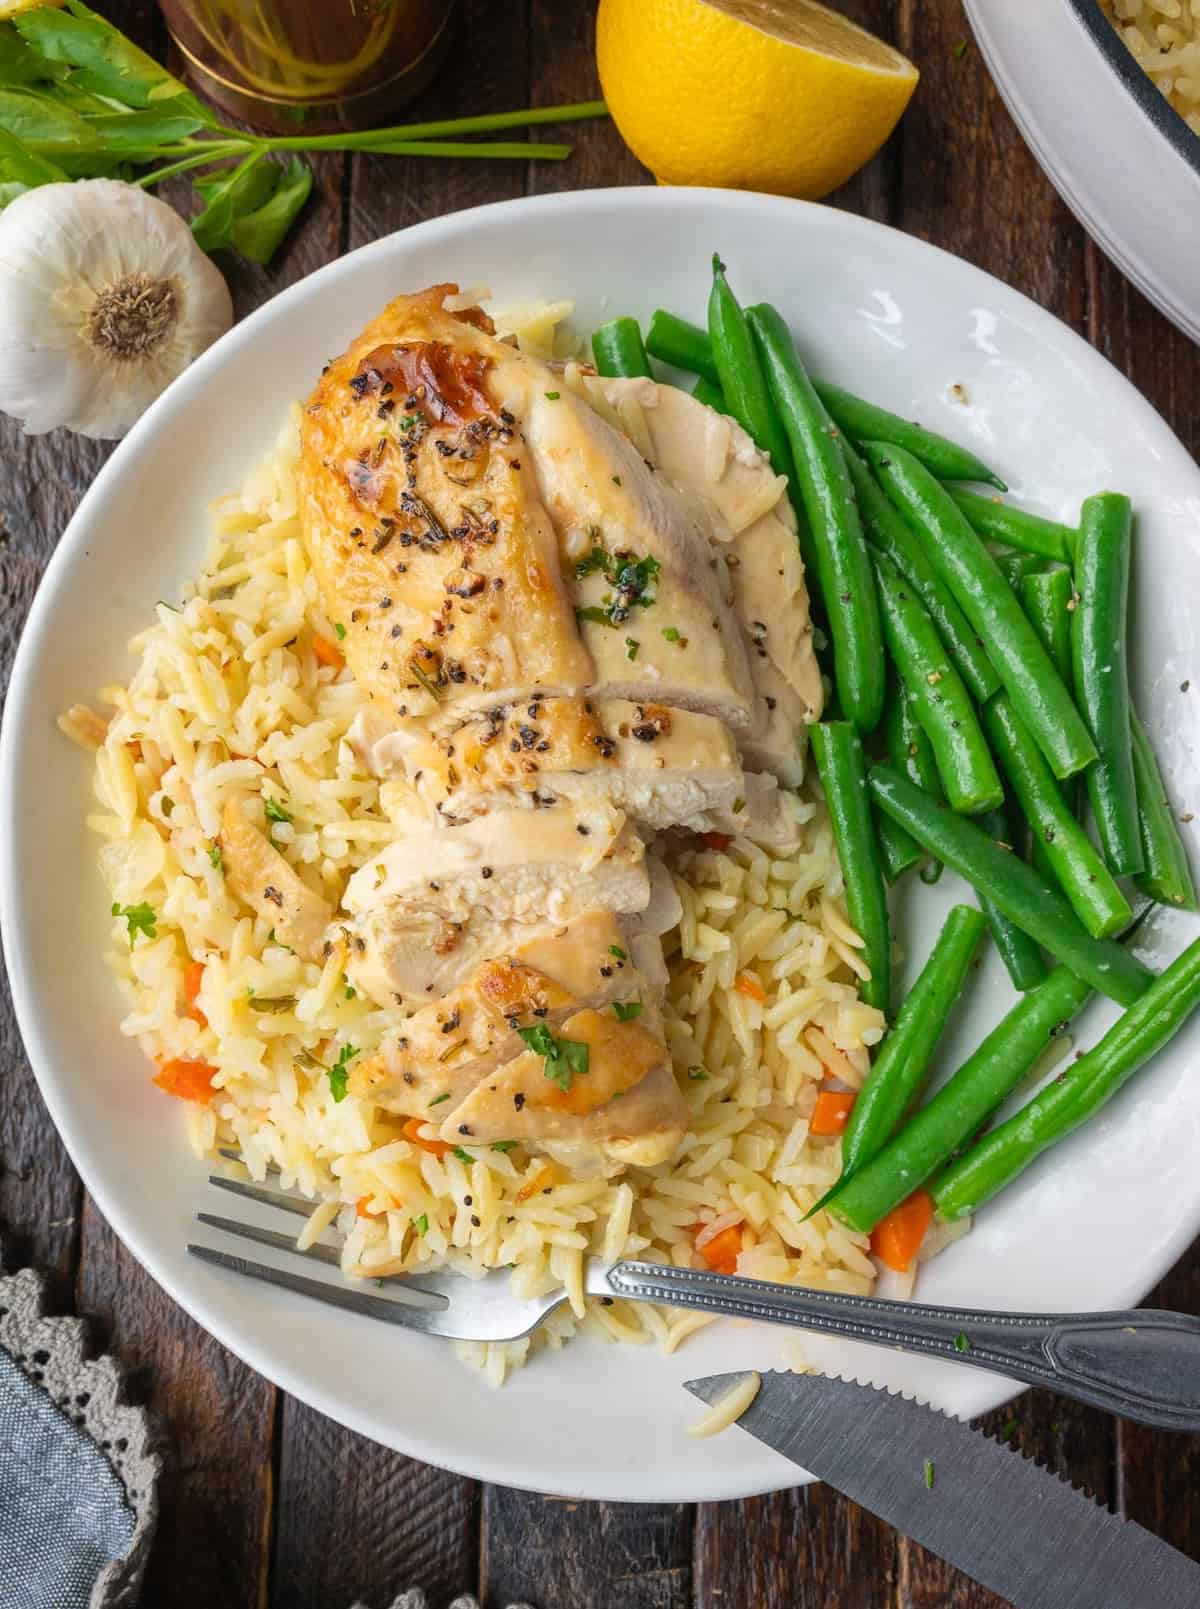 Lemon herb chicken with rice pilaf on a plate.